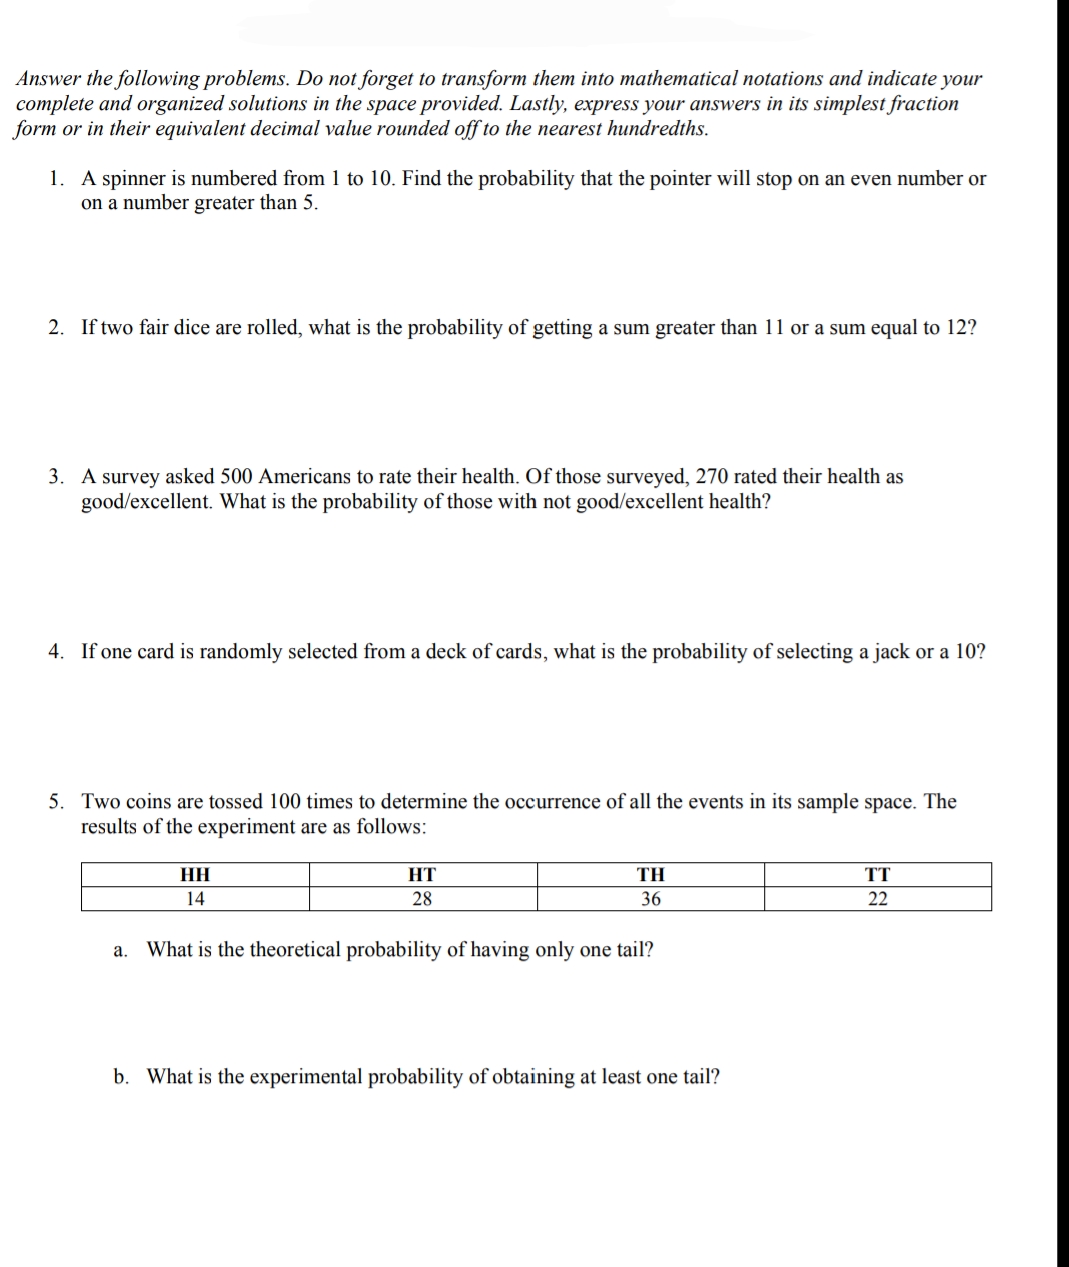 Answer the following problems. Do not forget to transform them into mathematical notations and indicate your
complete and organized solutions in the space provided. Lastly, express your answers in its simplest fraction
form or in their equivalent decimal value rounded off to the nearest hundredths.
1. A spinner is numbered from 1 to 10. Find the probability that the pointer will stop on an even number or
on a number greater than 5.
2. If two fair dice are rolled, what is the probability of getting a sum greater than 11 or a sum equal to 12?
3. A survey asked 500 Americans to rate their health. Of those surveyed, 270 rated their health as
good/excellent. What is the probability of those with not good/excellent health?
4. If one card is randomly selected from a deck of cards, what is the probability of selecting a jack or a 10?
5. Two coins are tossed 100 times to determine the occurrence of all the events in its sample space. The
results of the experiment are as follows:
TH
TT
14
28
36
22
а.
What is the theoretical probability of having only one tail?
b. What is the experimental probability of obtaining at least one tail?
